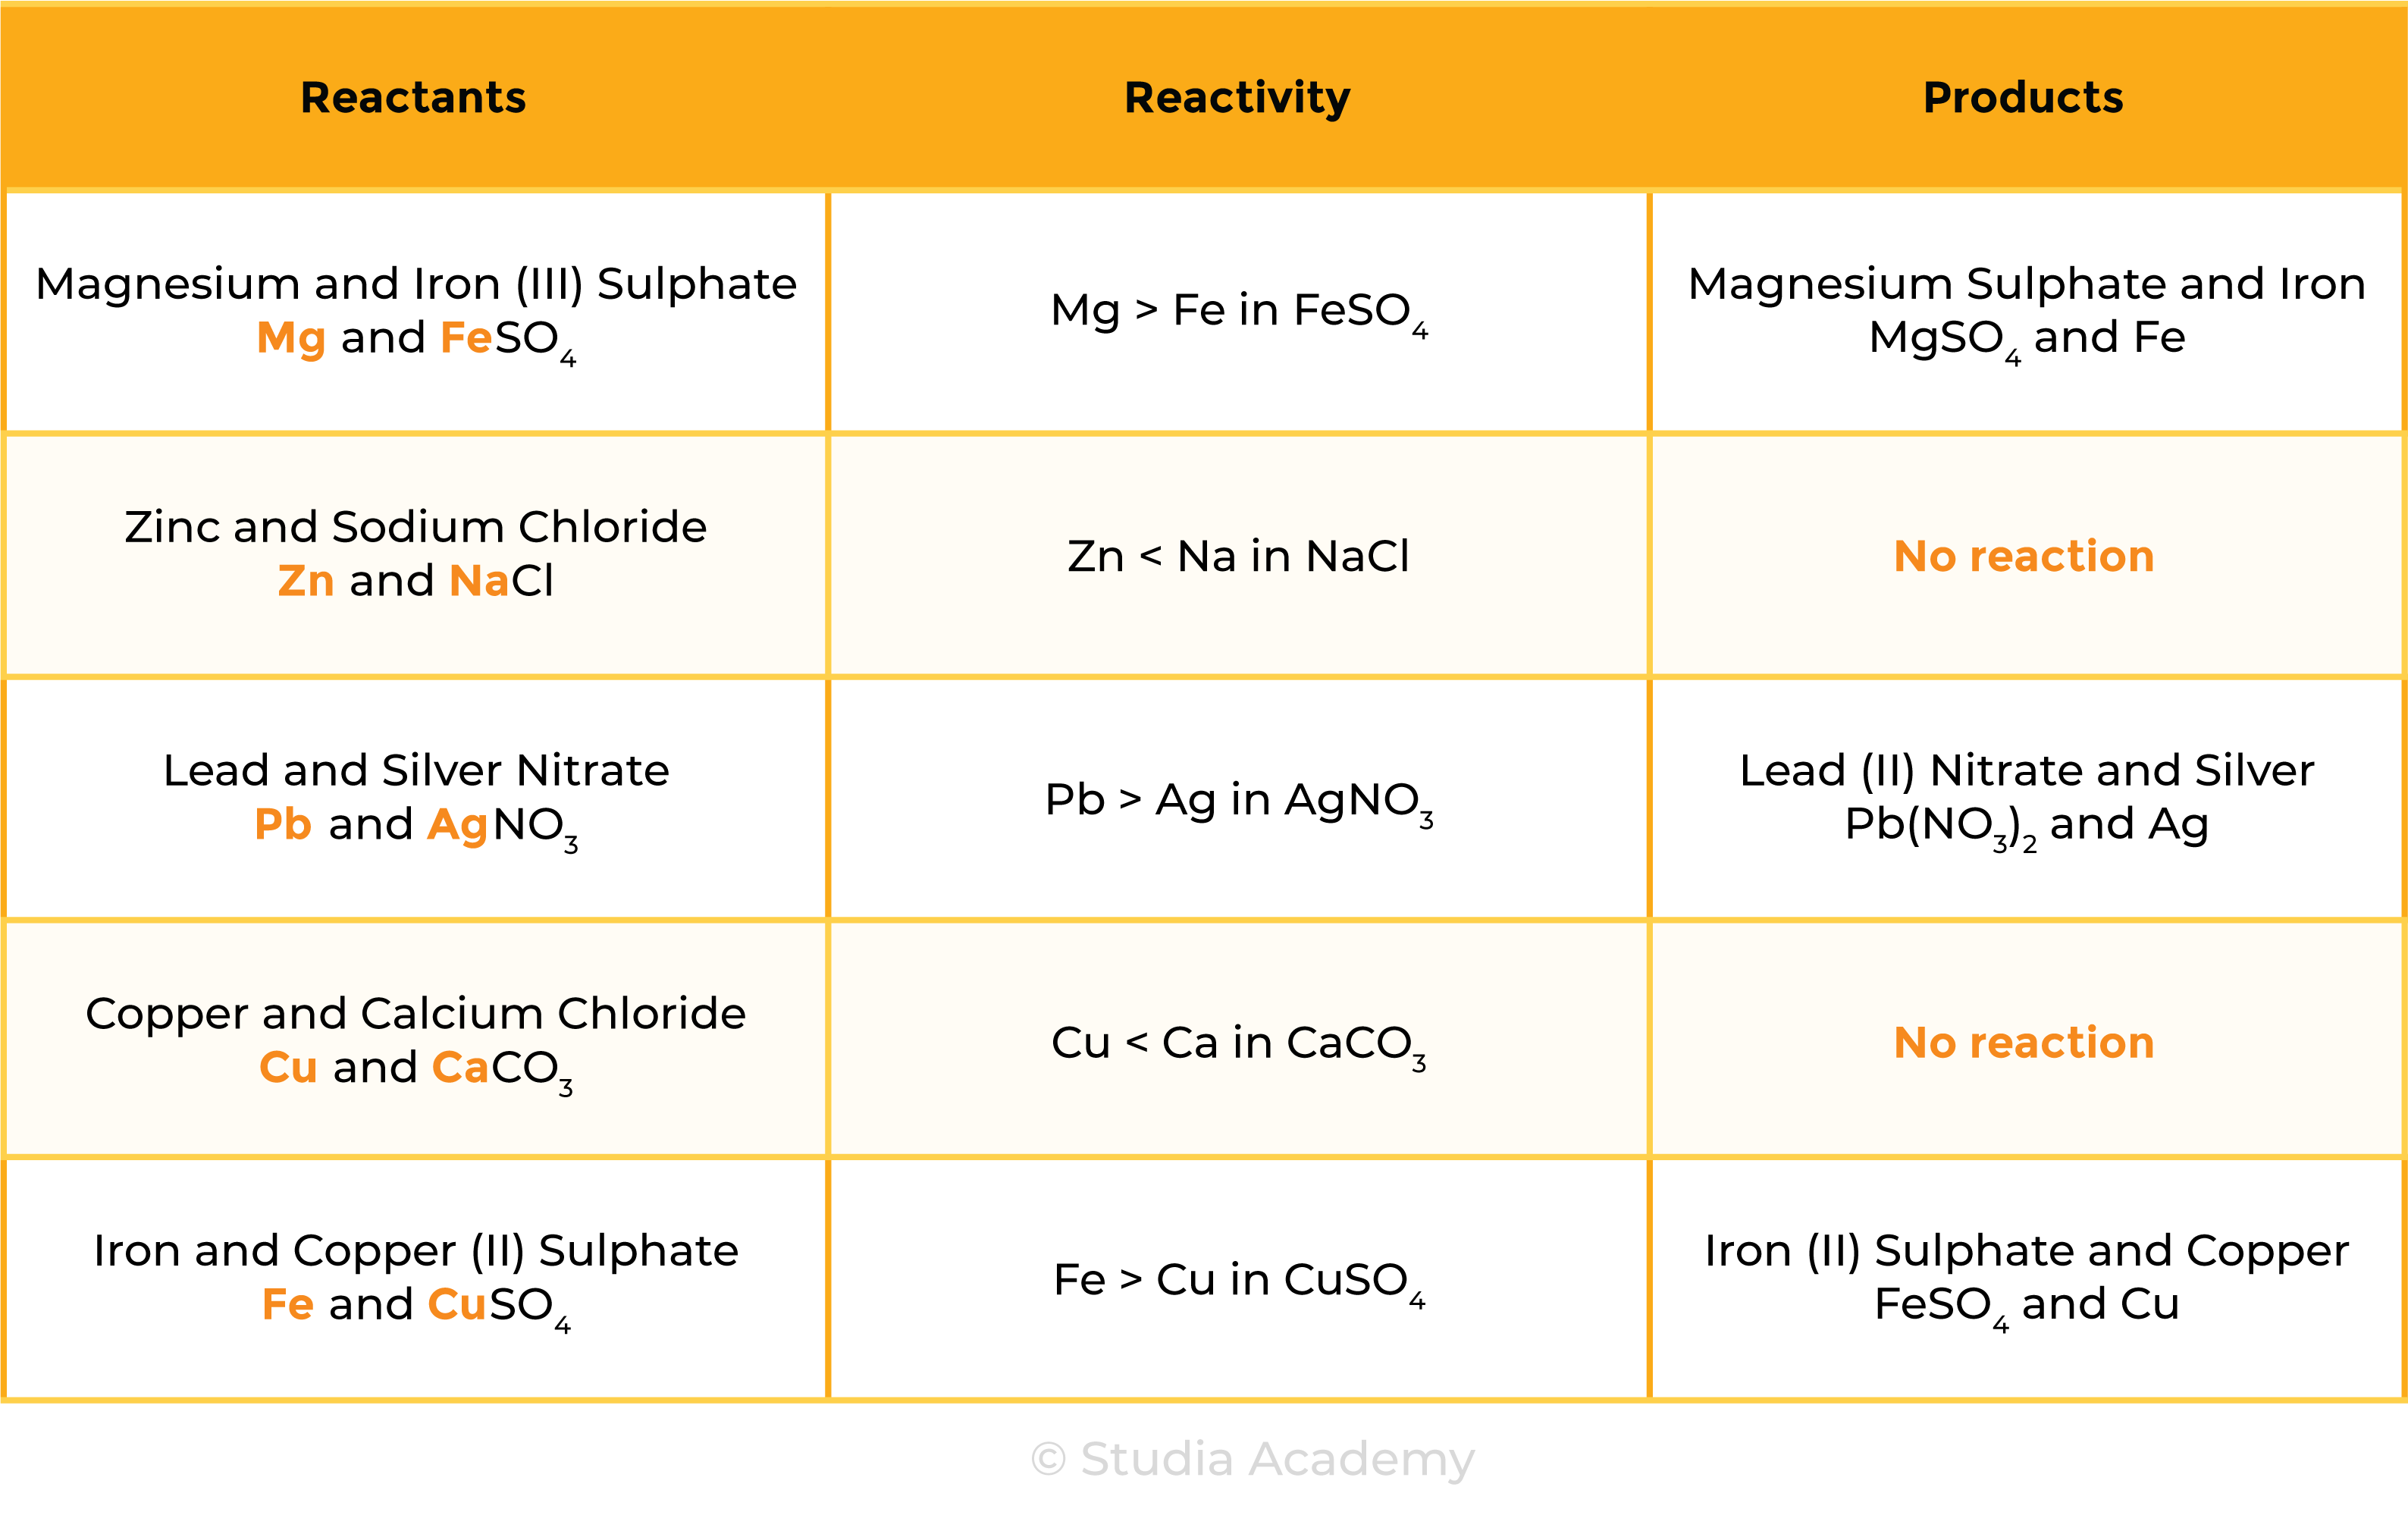 edexcel_igcse_chemistry_topic 13 tables_reactivity series_004_metal and aqueous solution of metal salts reactions